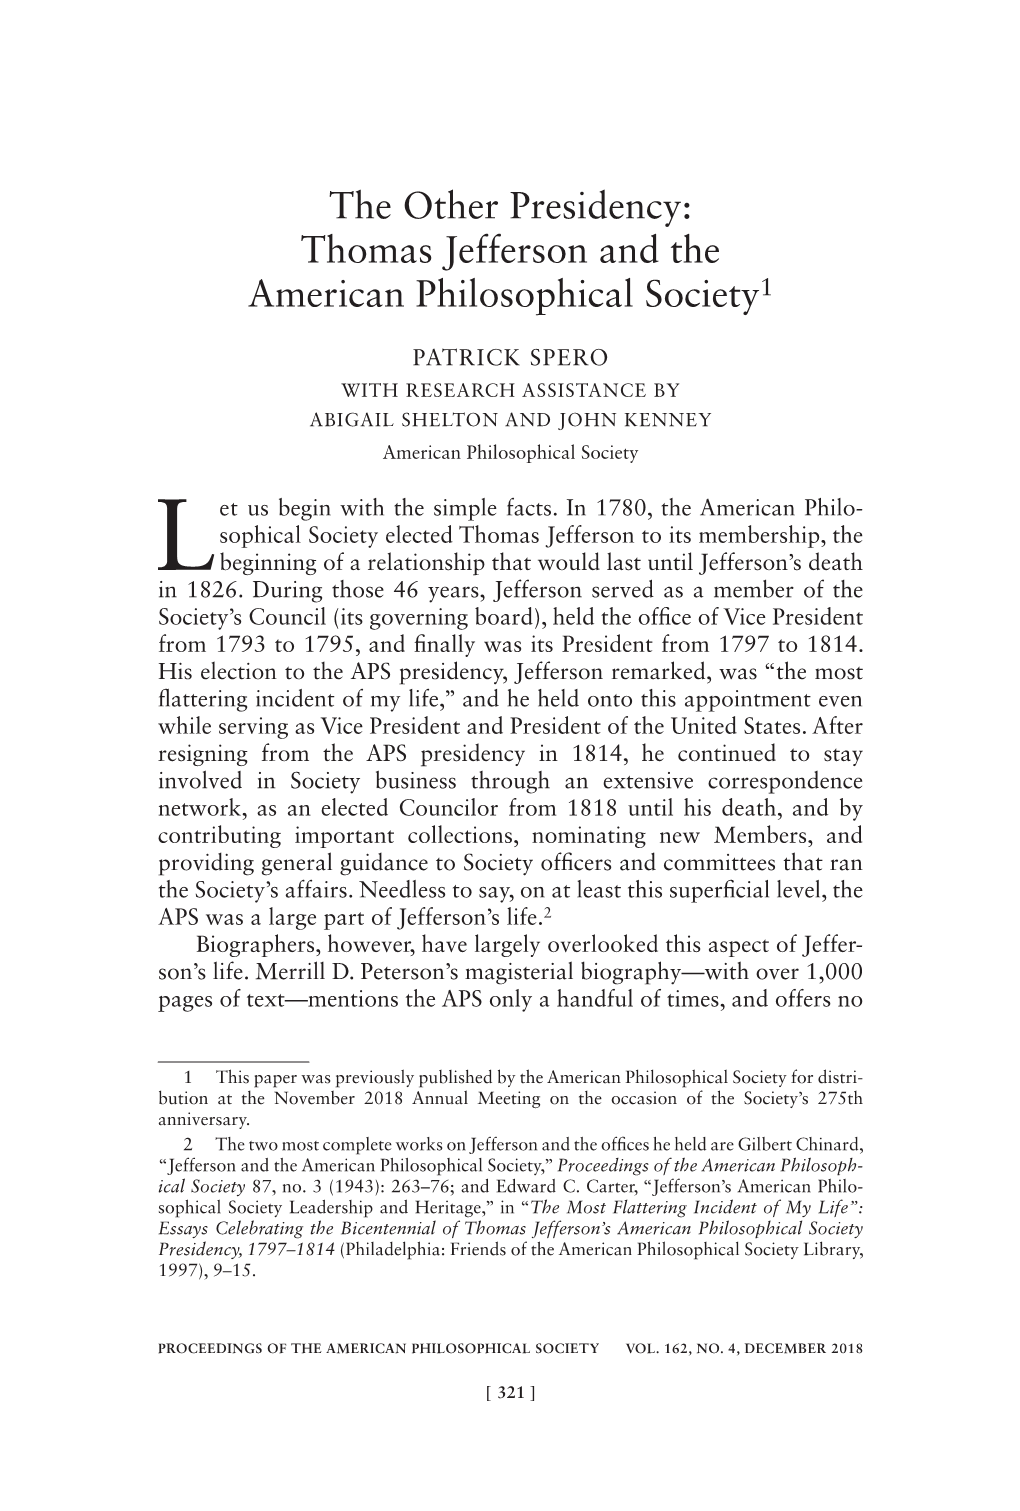 The Other Presidency: Thomas Jefferson and the American Philosophical Society1